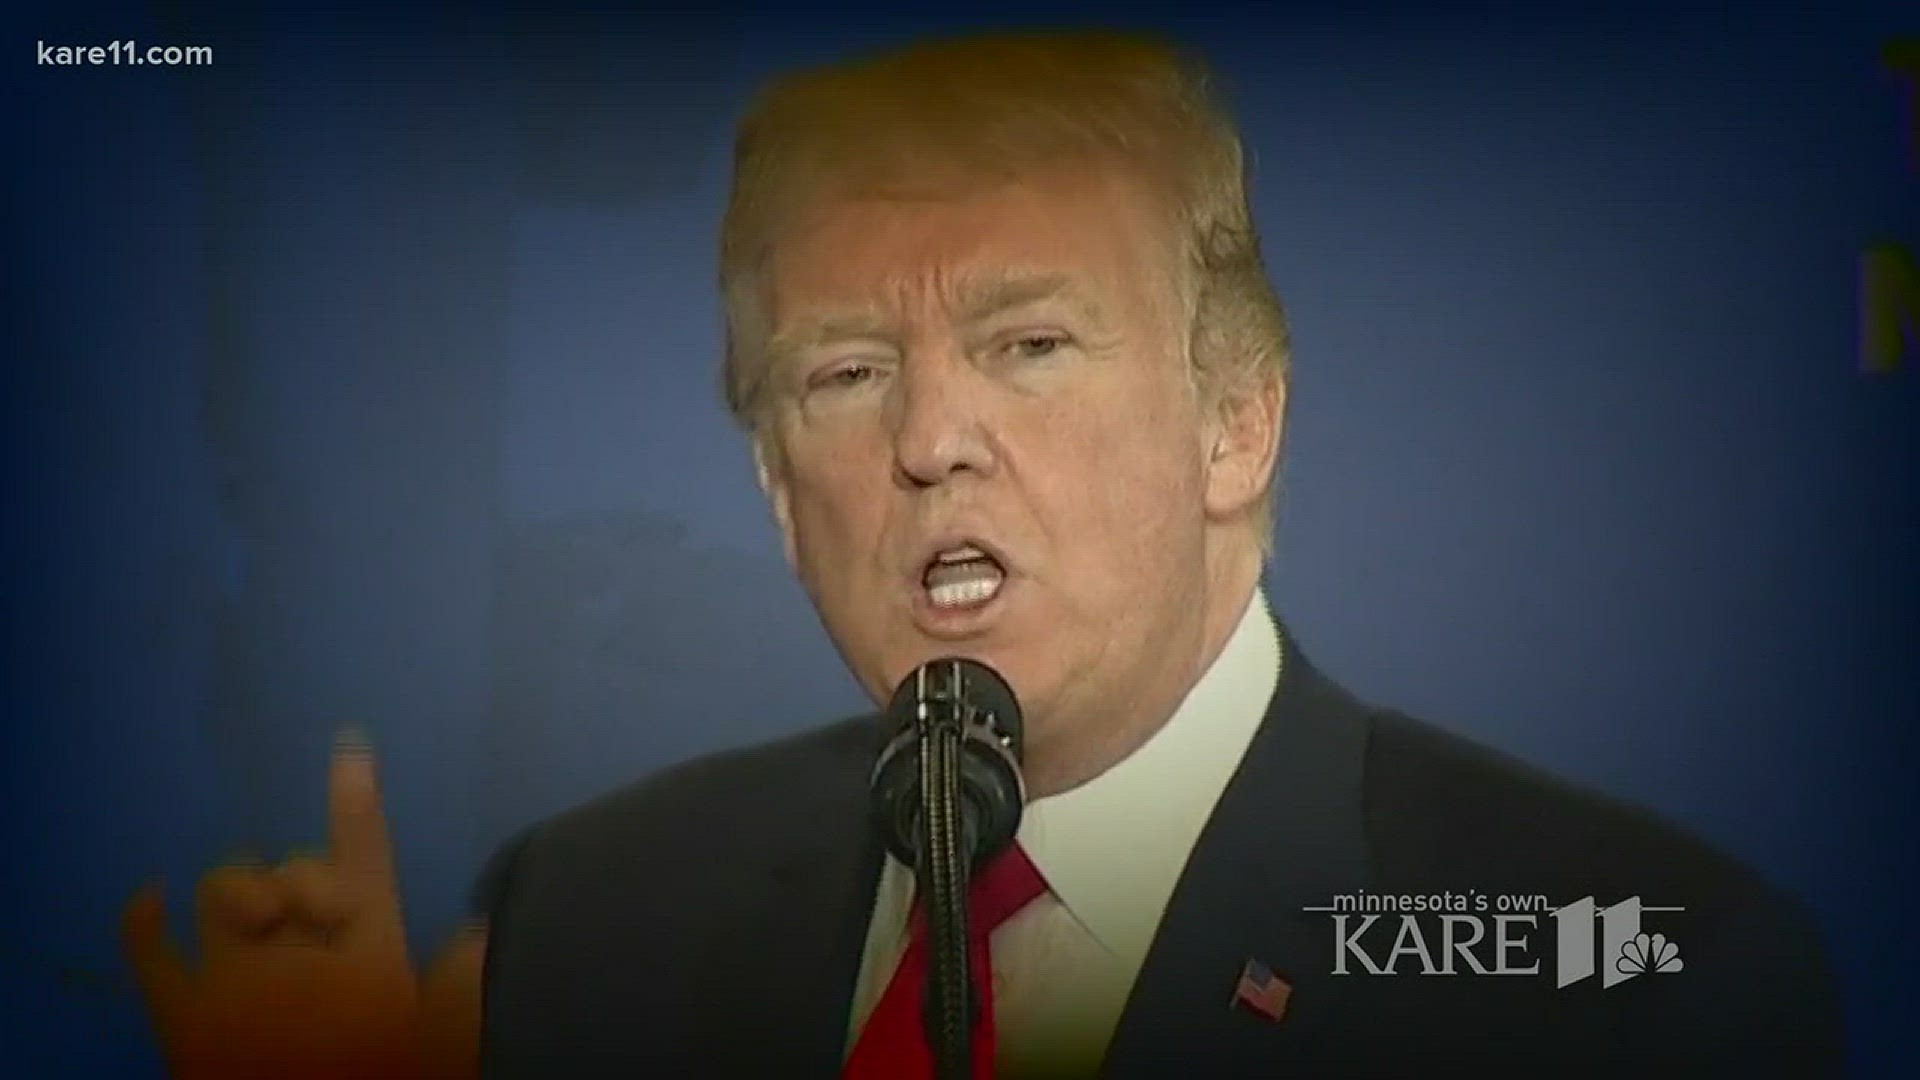 Trump has mused openly in recent weeks about subjecting drug dealers to the 'ultimate penalty.' http://kare11.tv/2FM3Zhh